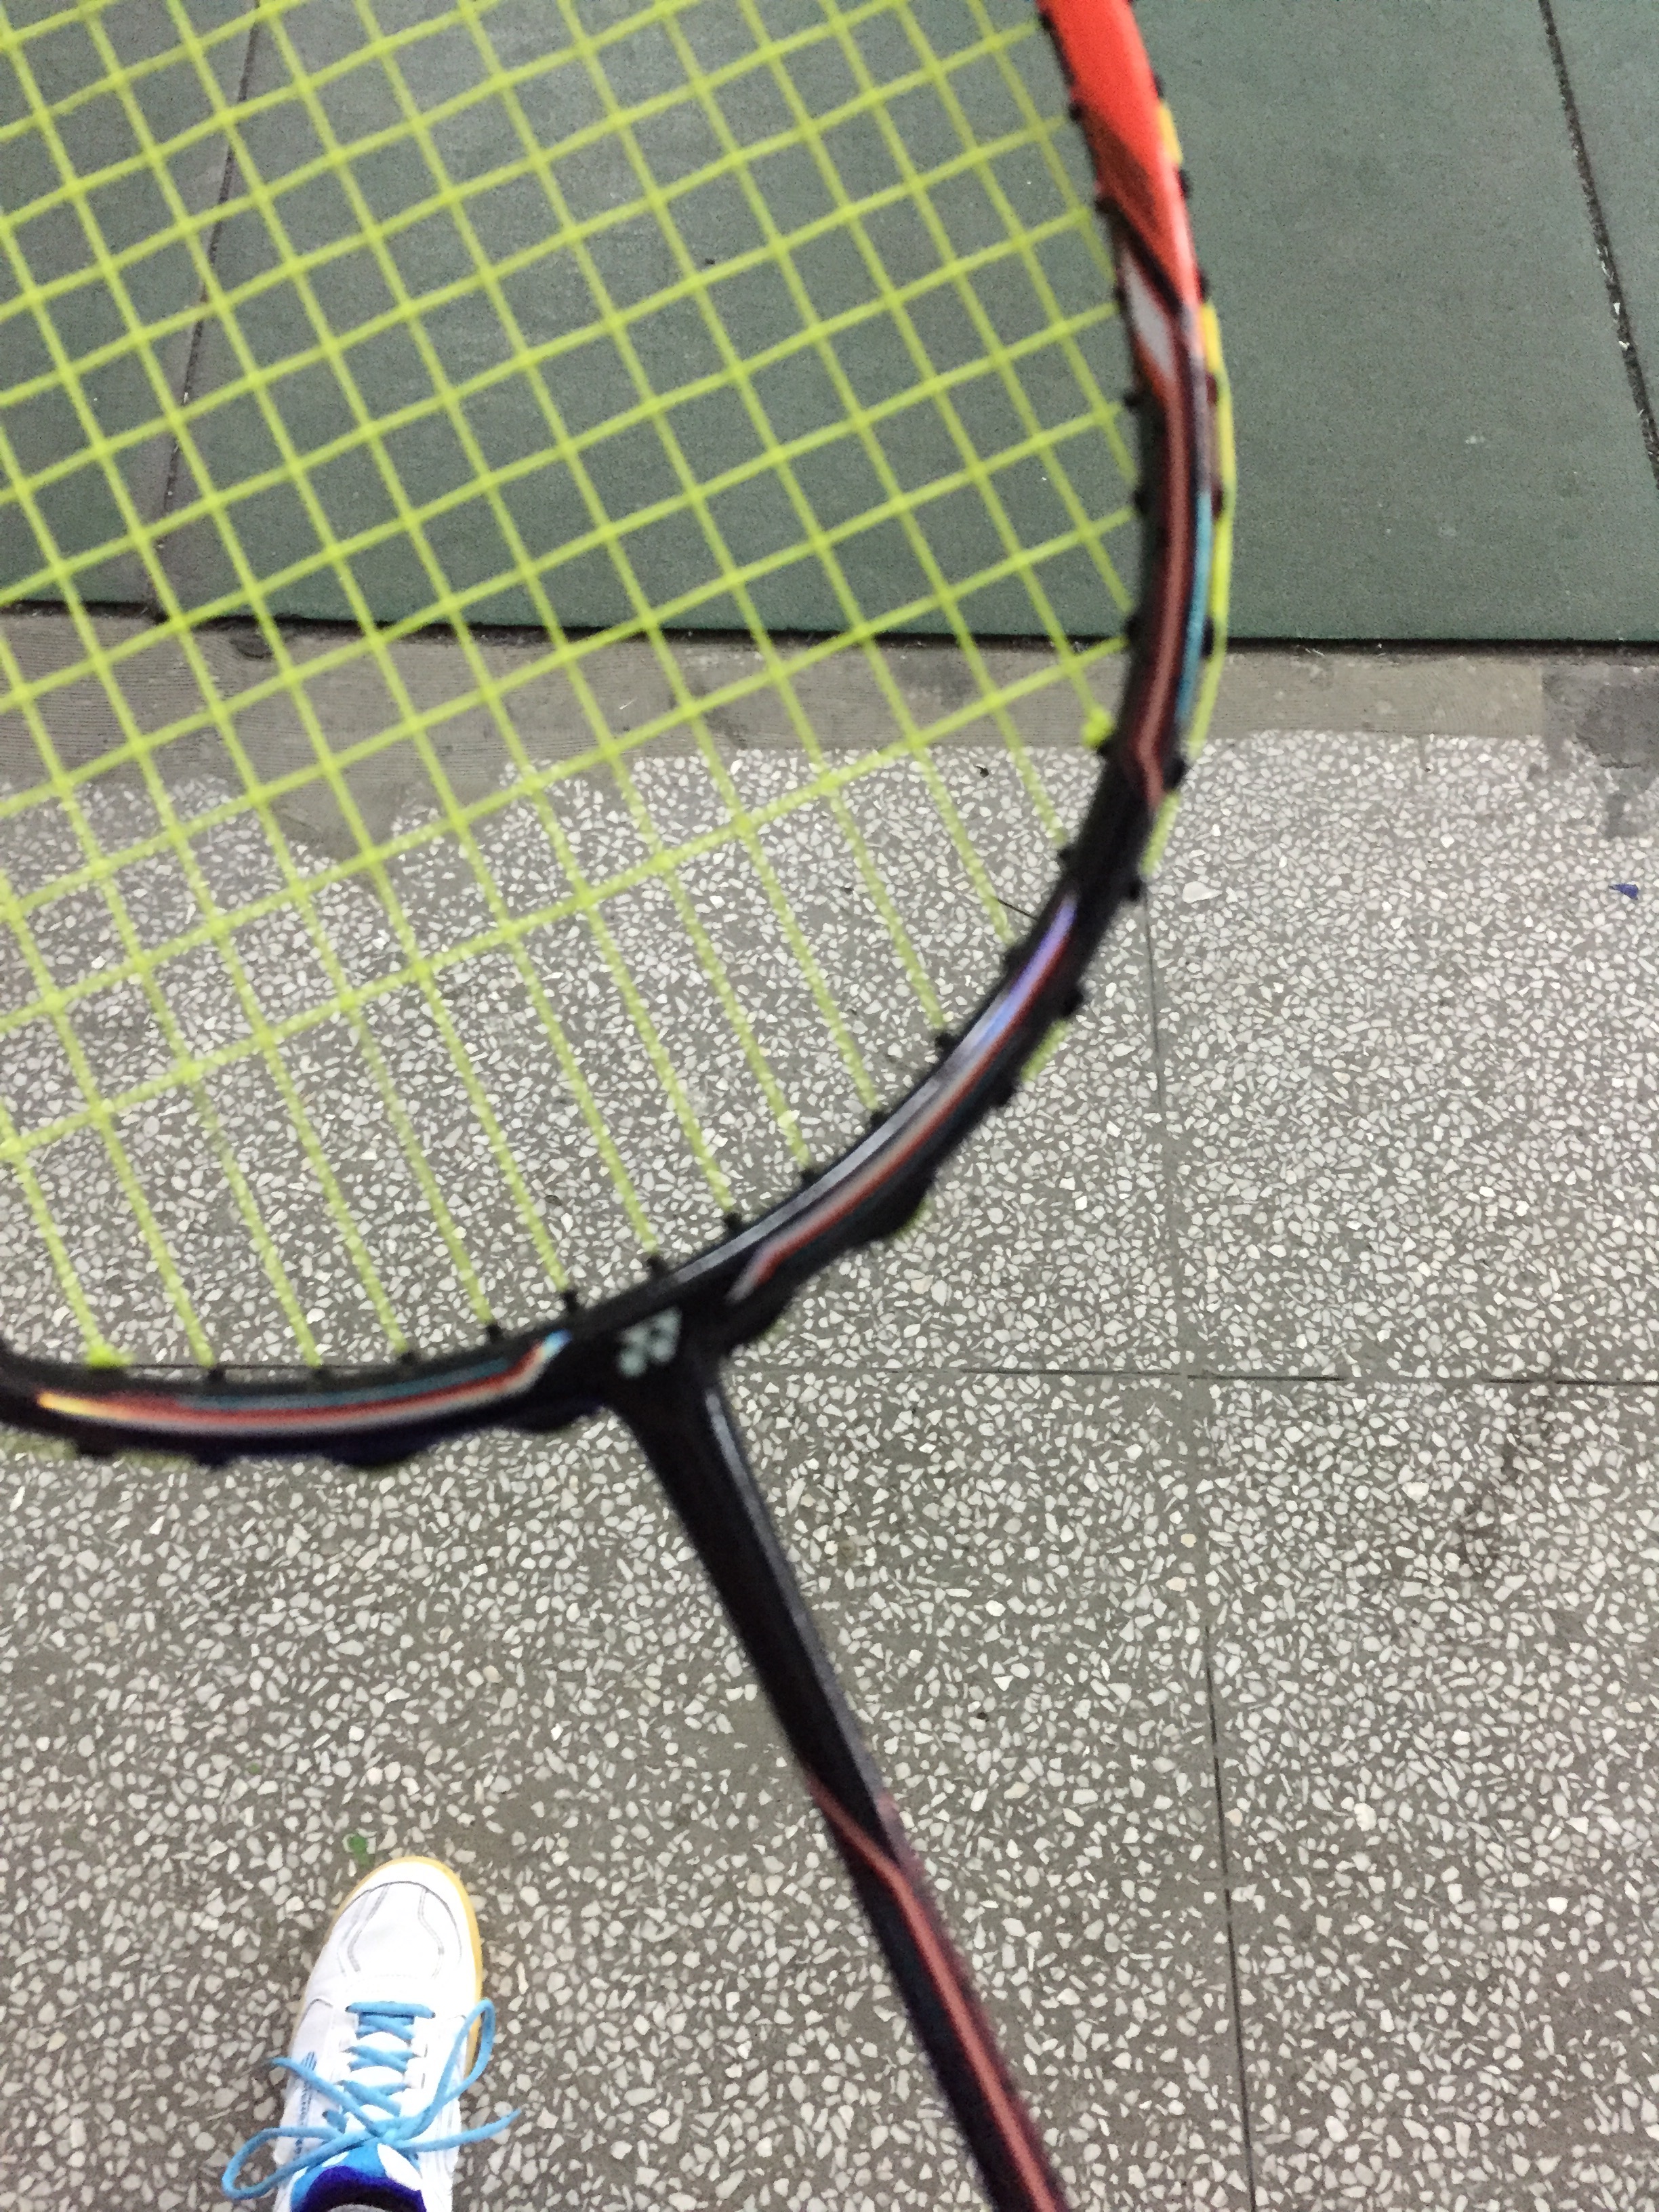 My phone wouldn't focus o the slim racket handle, but this was the racket I used on thursday. Almost $200!! 